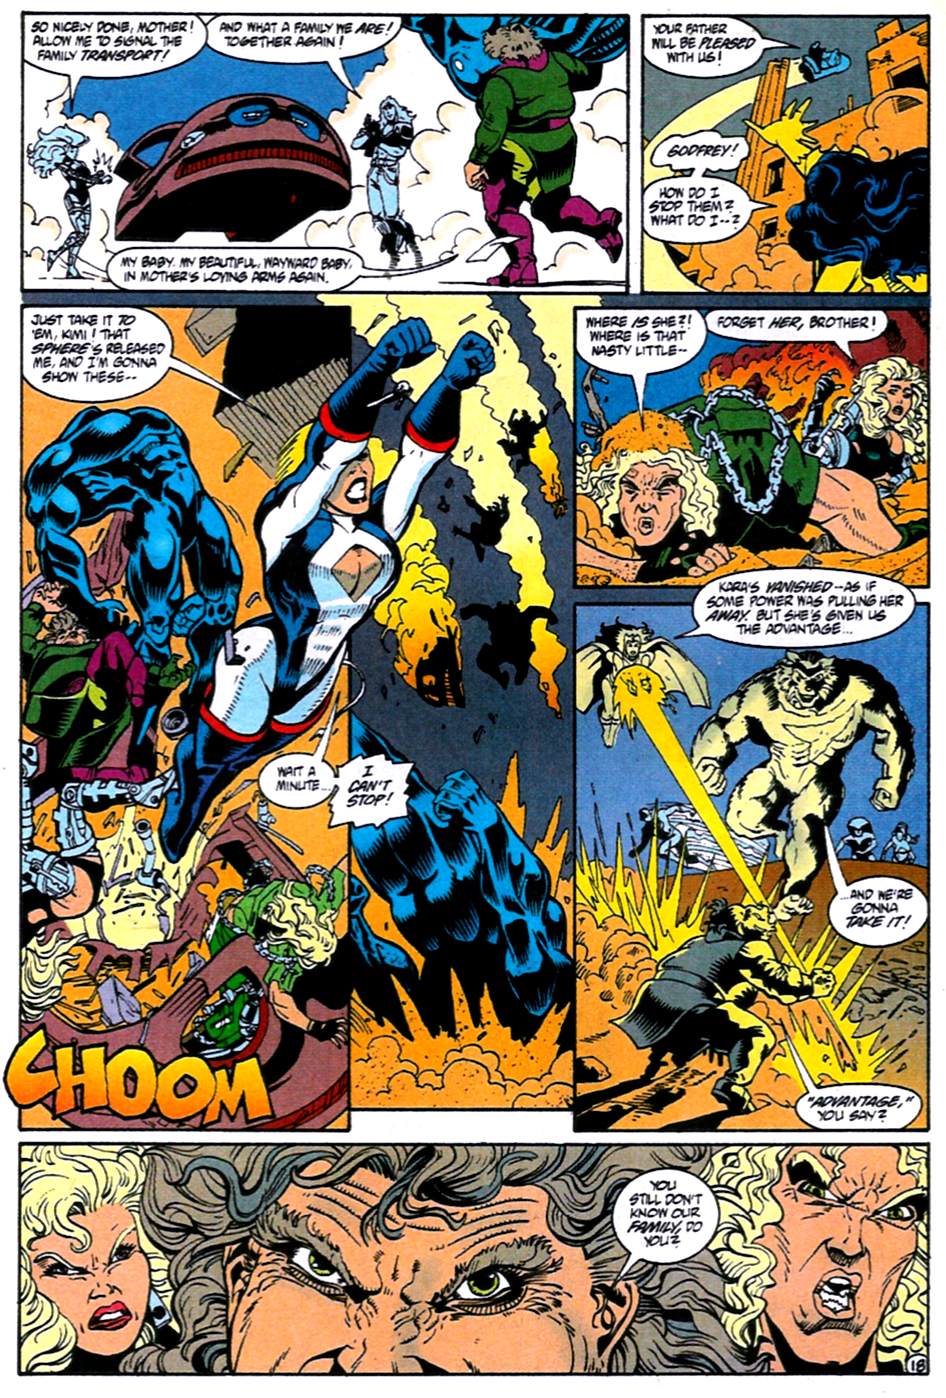 Justice League International (1993) 61 Page 18